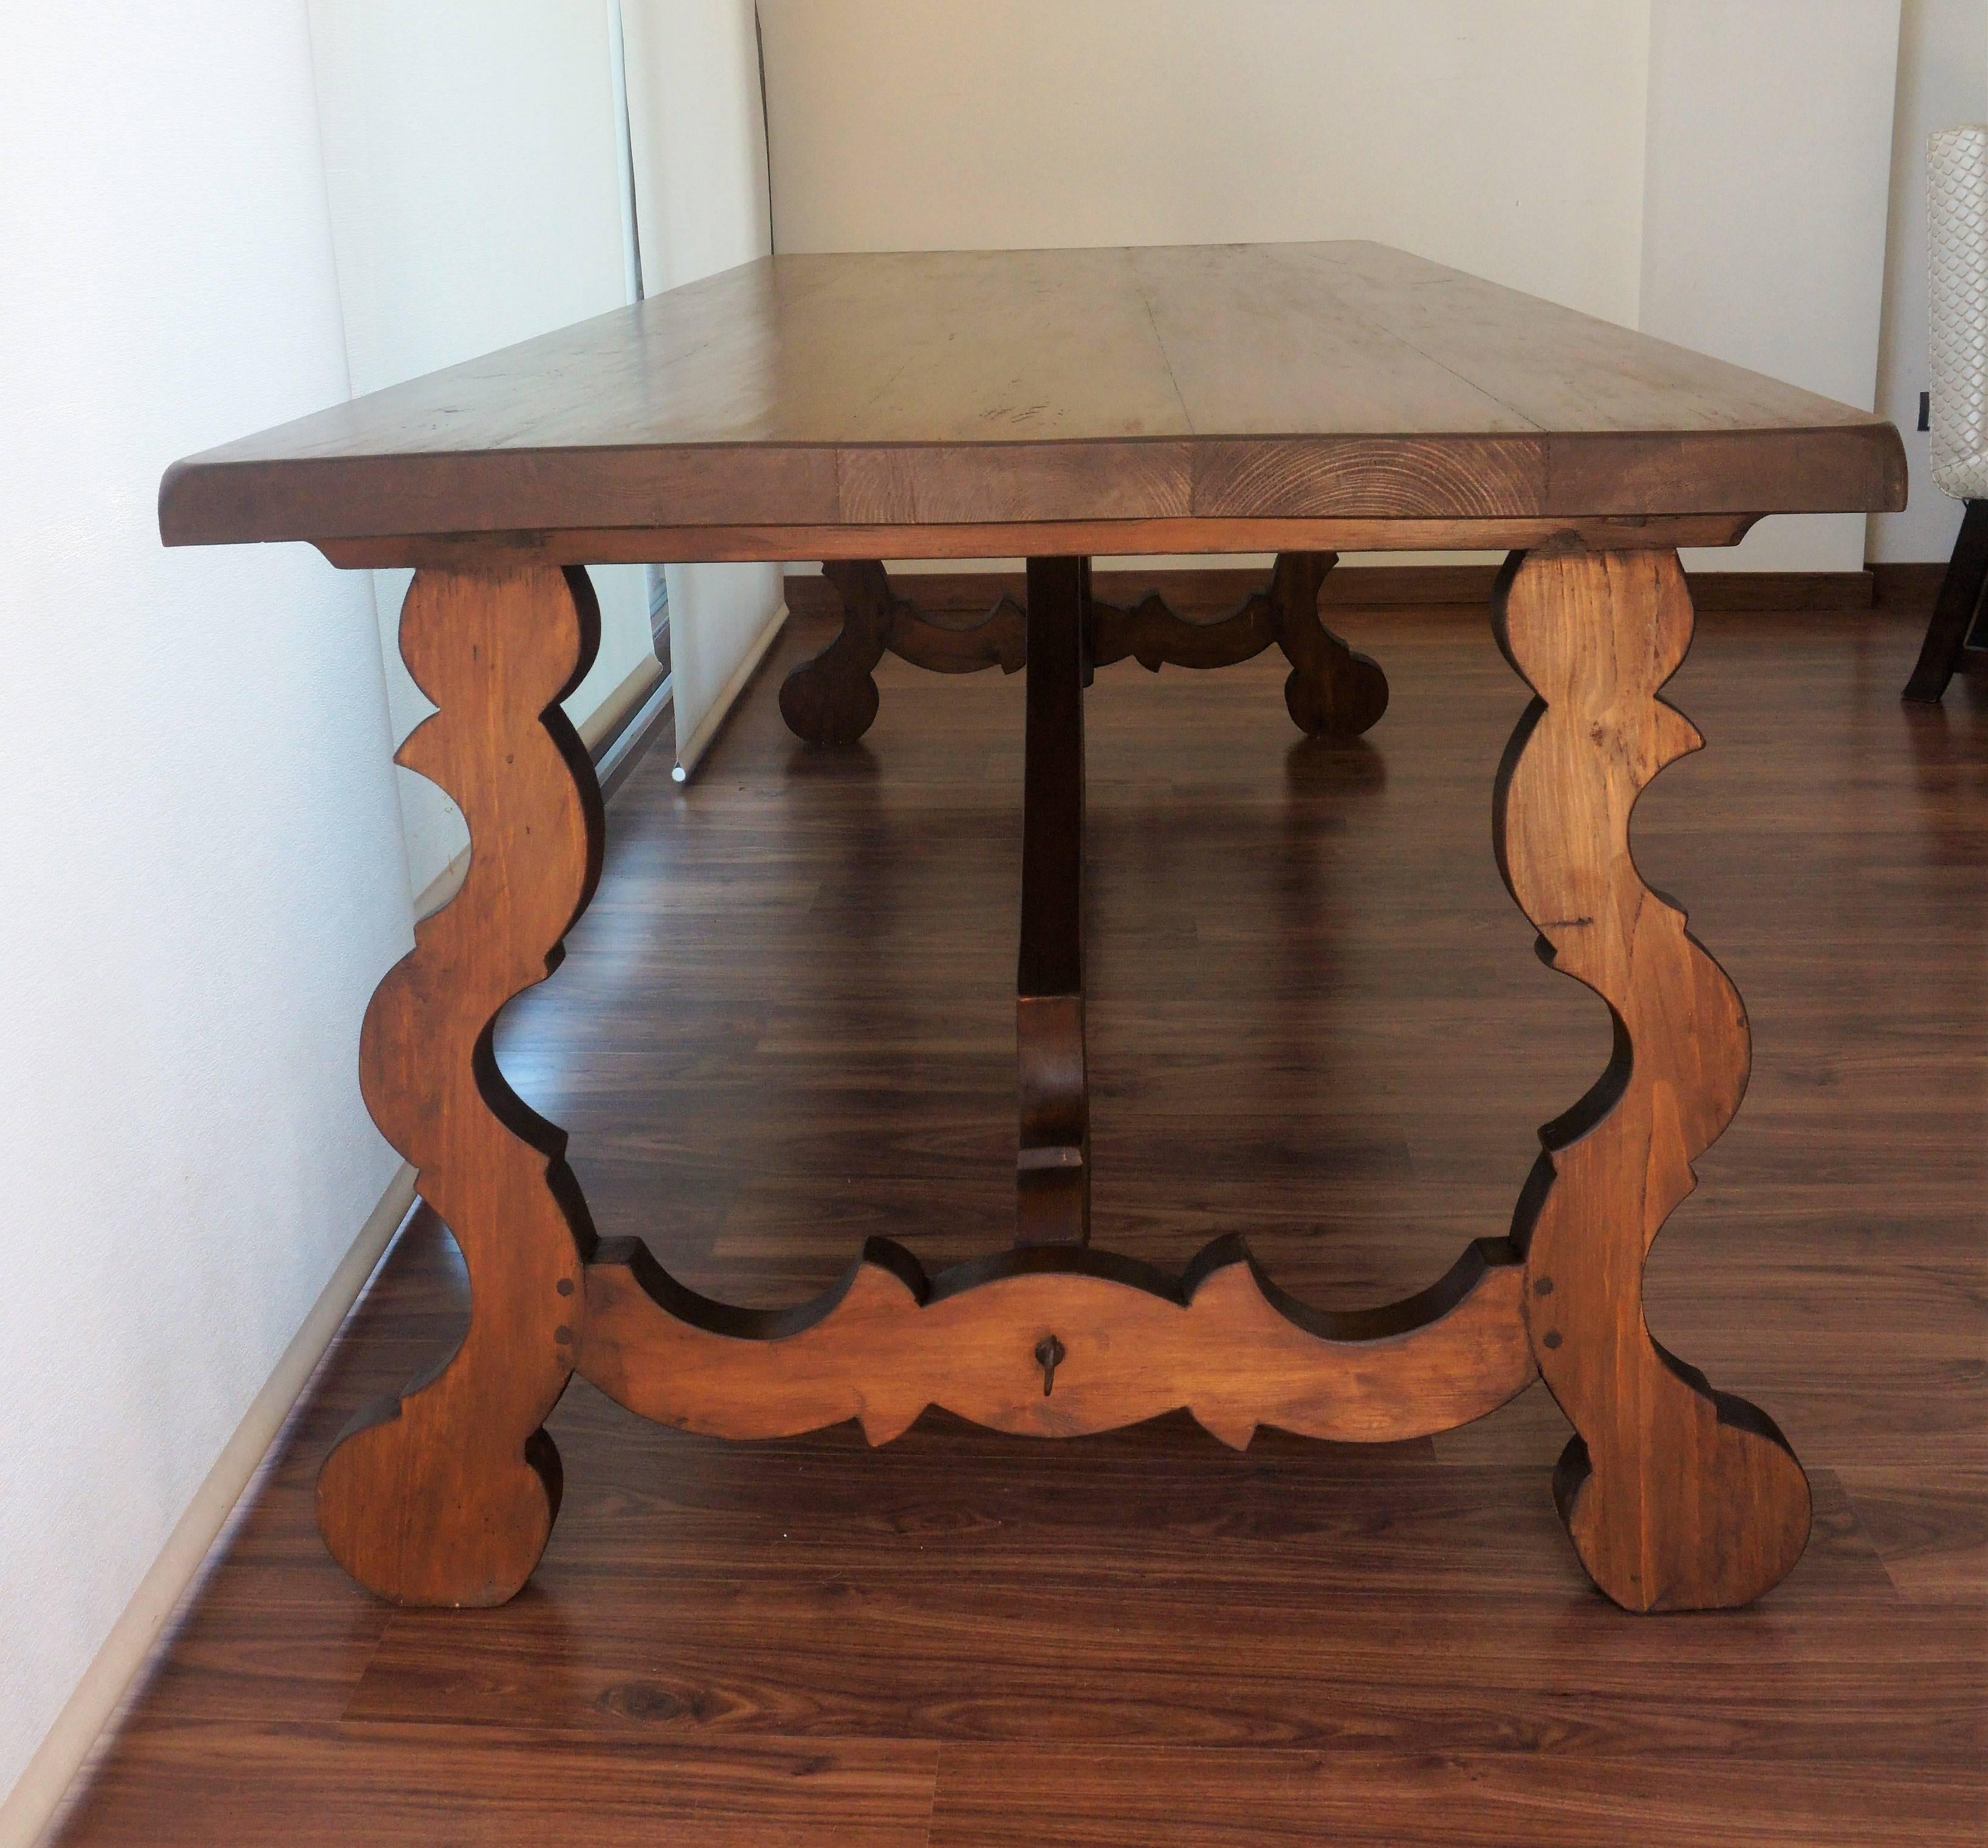 Spanish Colonial Large Spanish Dining Room Table with Lyre Leg